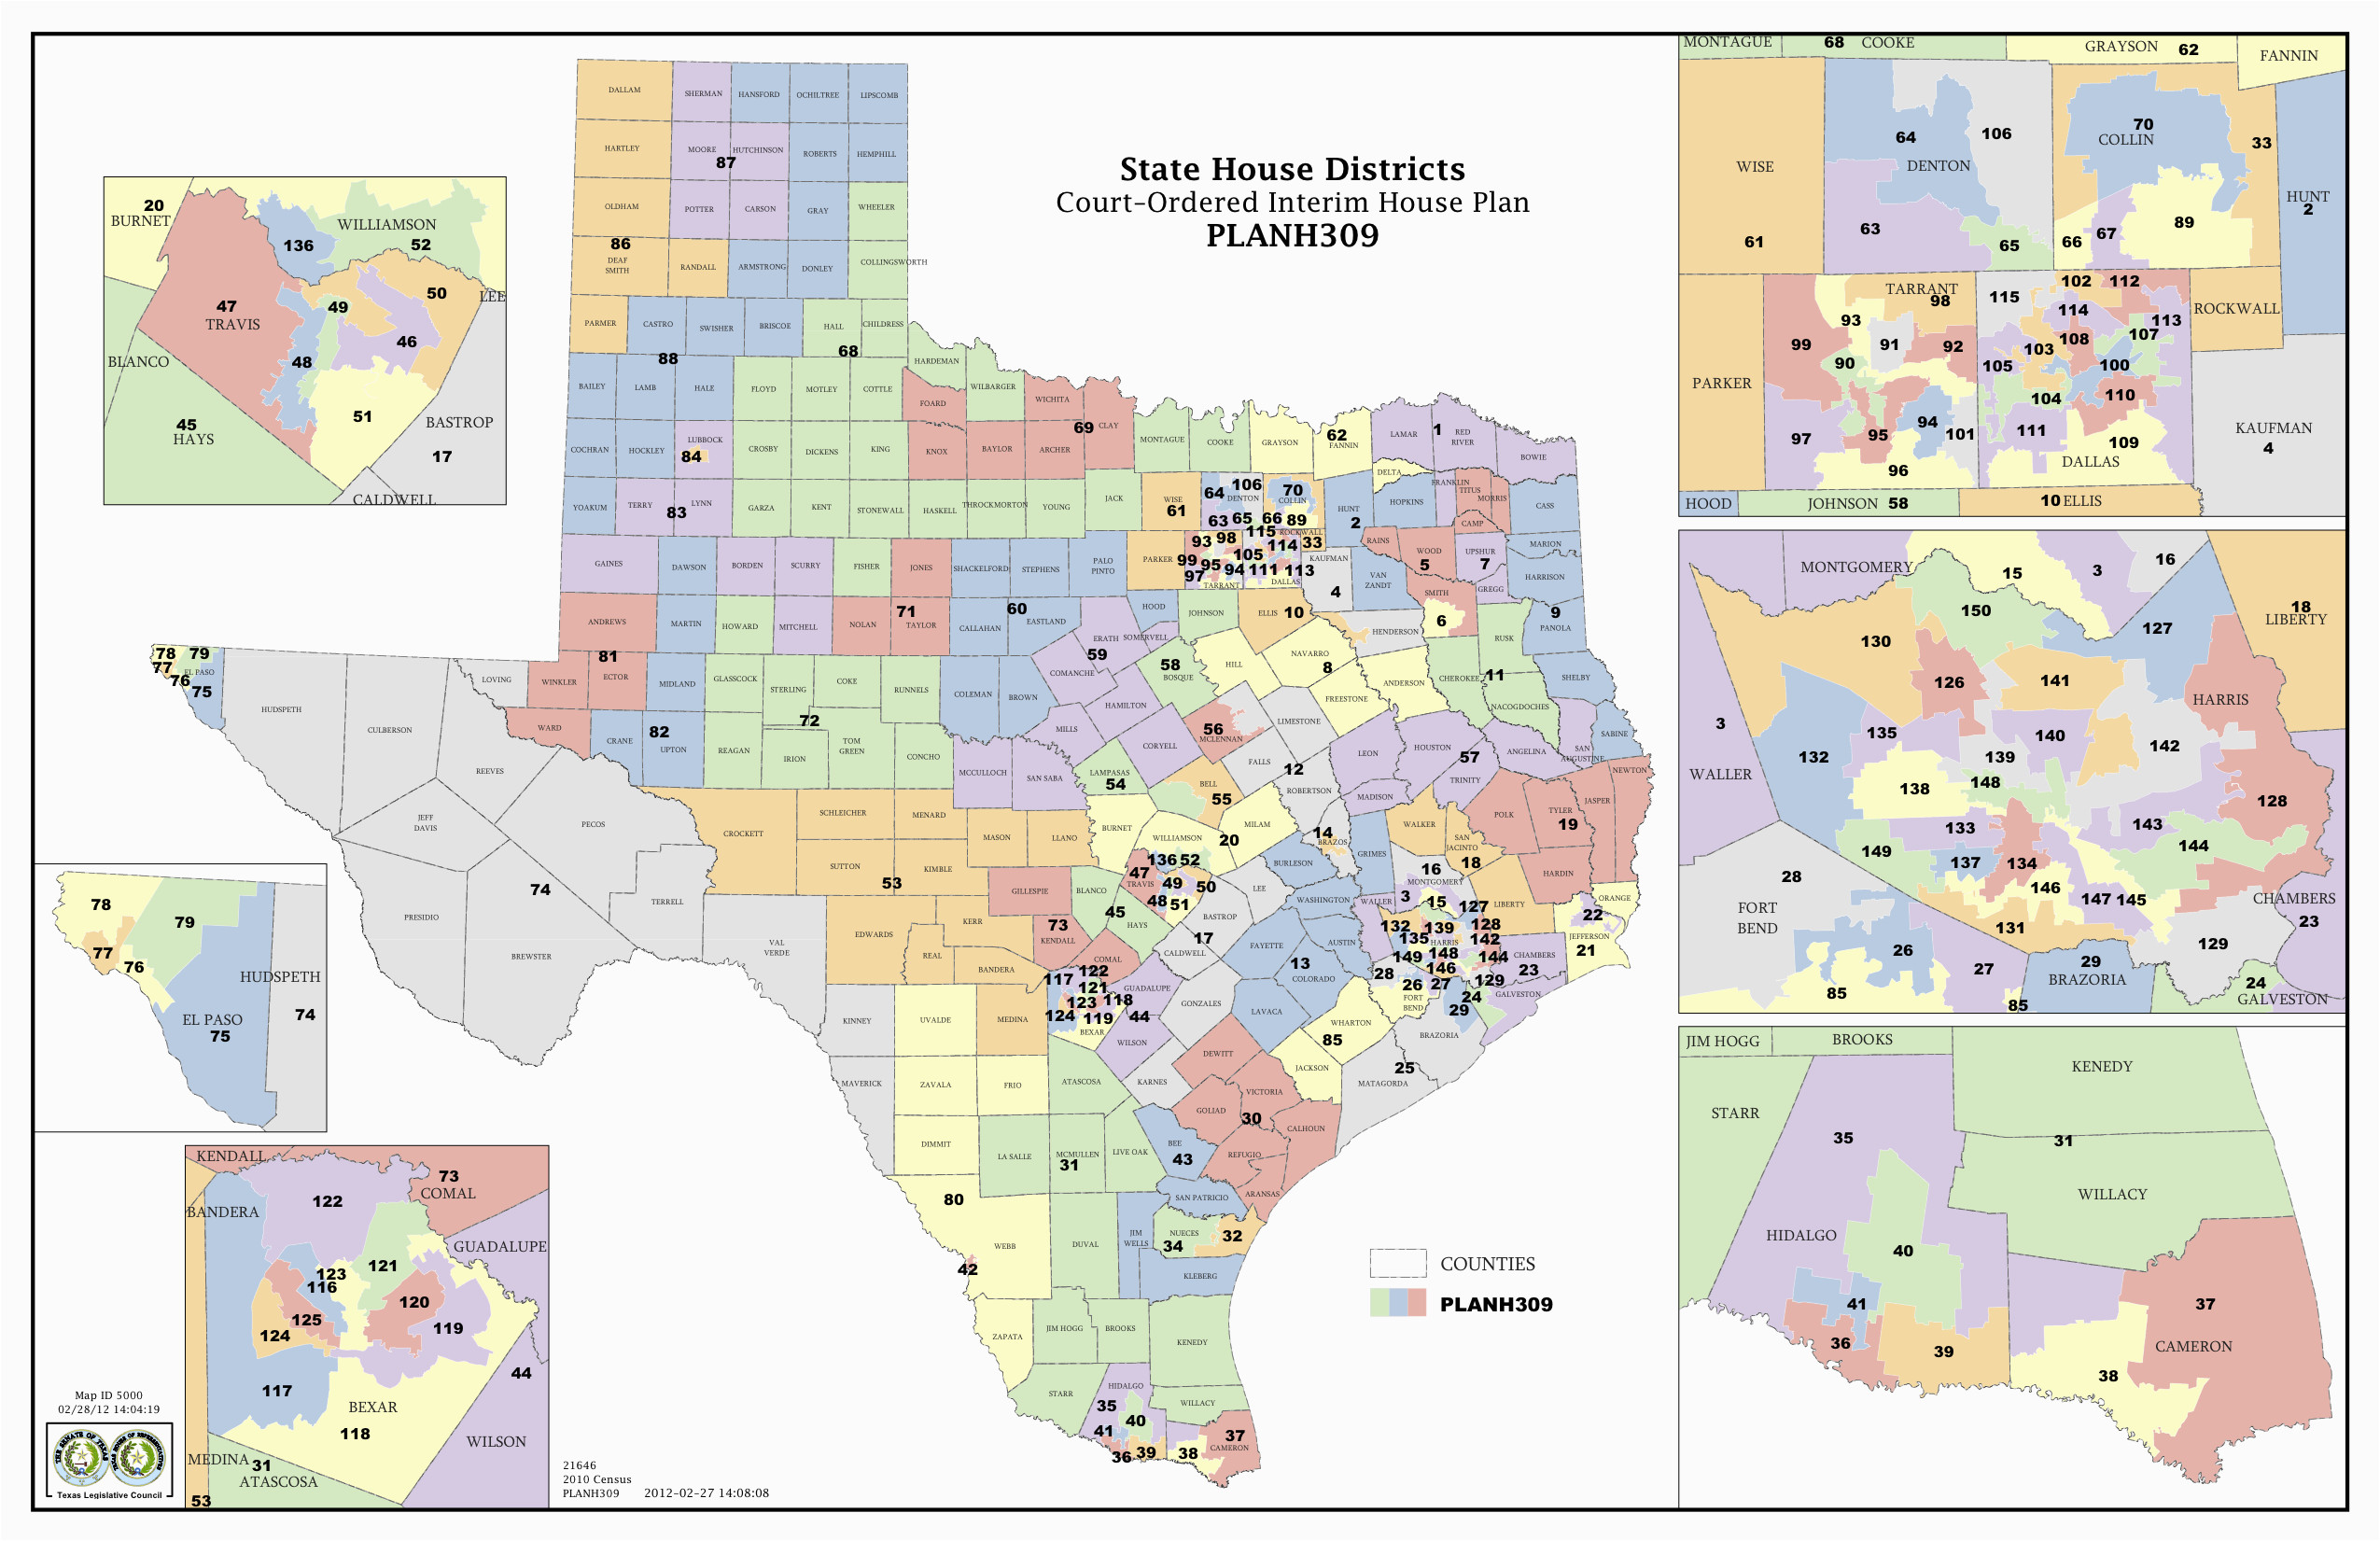 map of texas congressional districts business ideas 2013